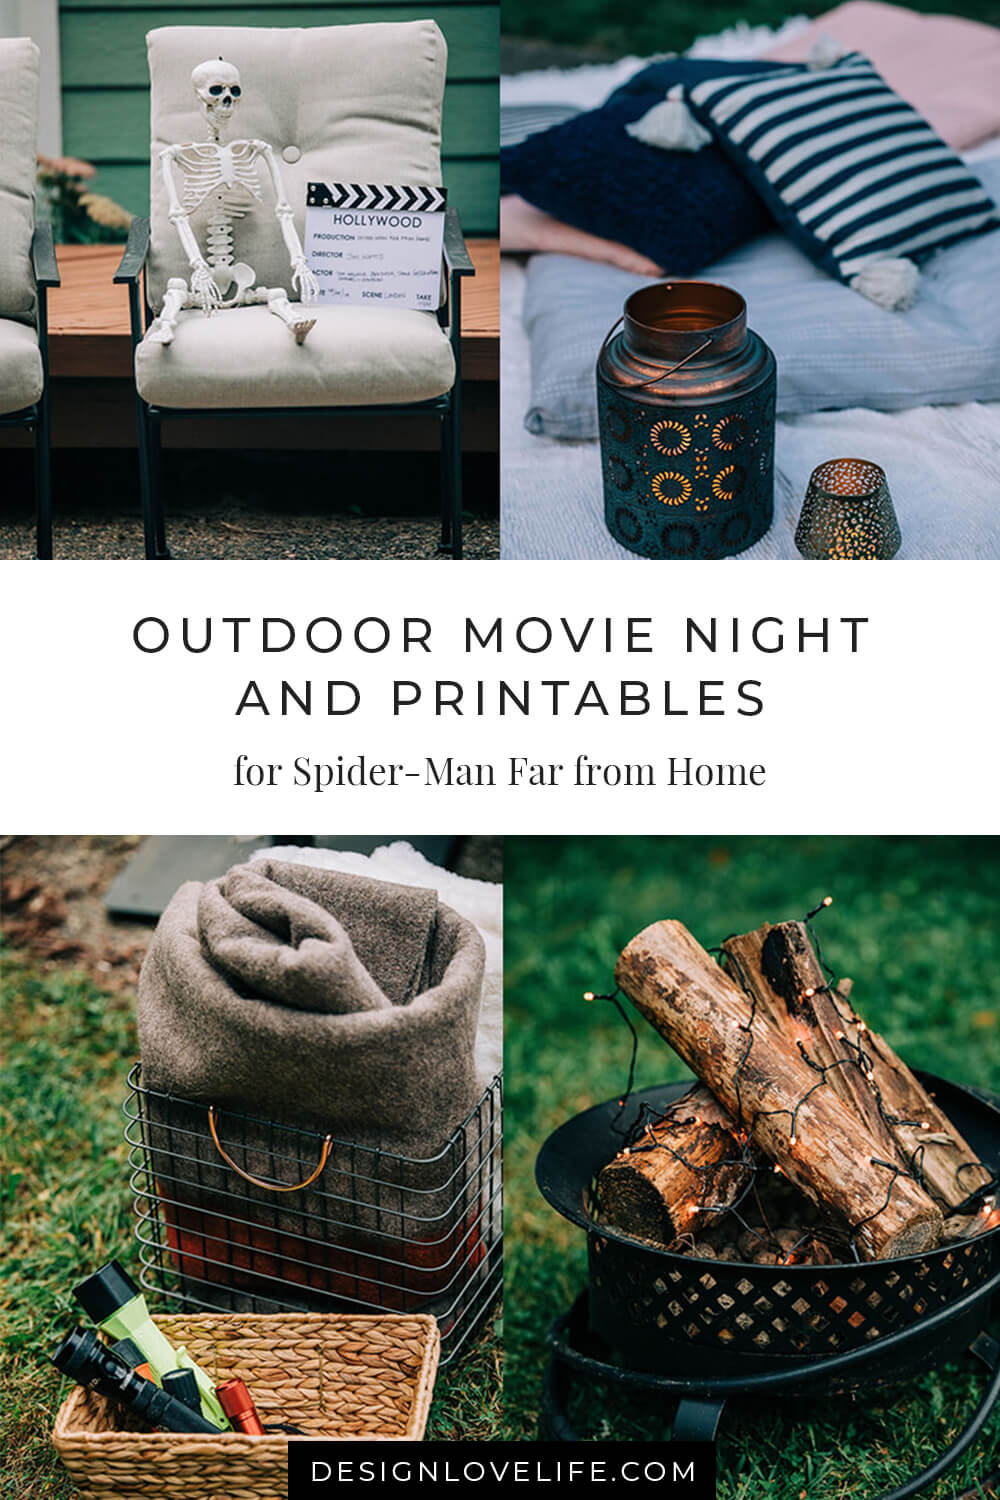 Outdoor Spider-Man: Far From Home Movie Night. Outdoor Movie Night with Printables for a Spider-Man themed party. Annie Johnson - Design Love Life